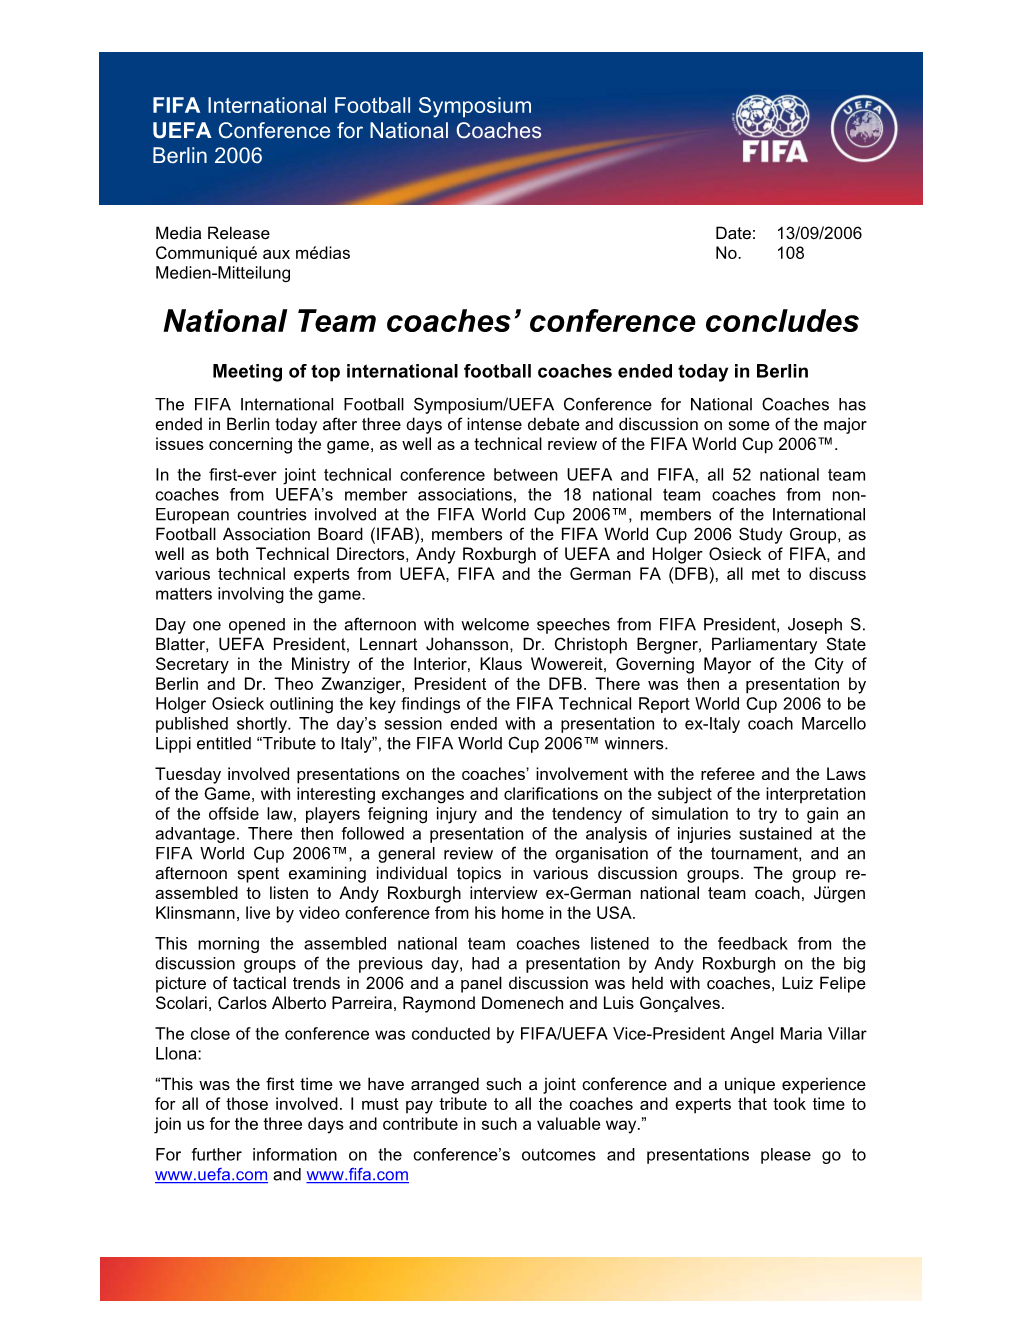 National Team Coaches' Conference Concludes